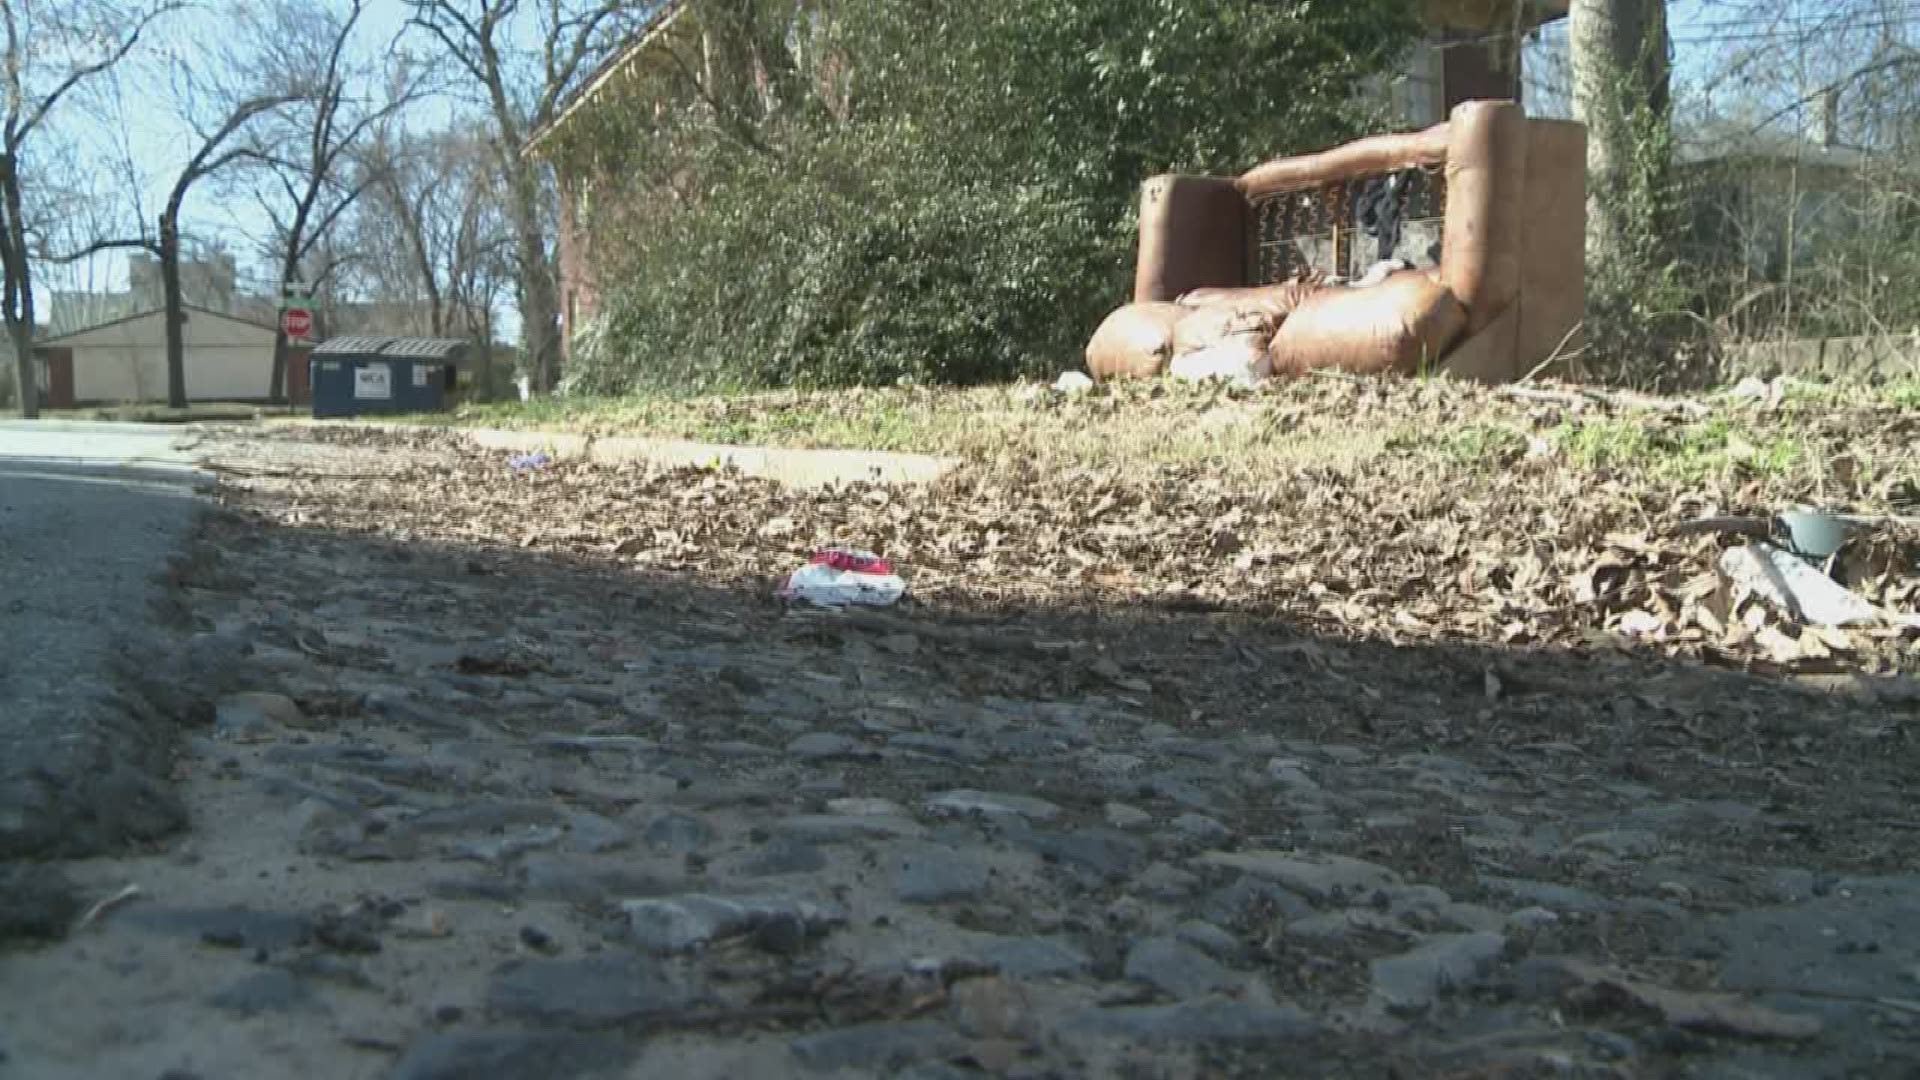 As Little Rock prepares to kick off its annual city wide clean up this weekend, homeowners in the Central High Historic Neighborhood said they're having trouble keeping their neighborhood beautiful.